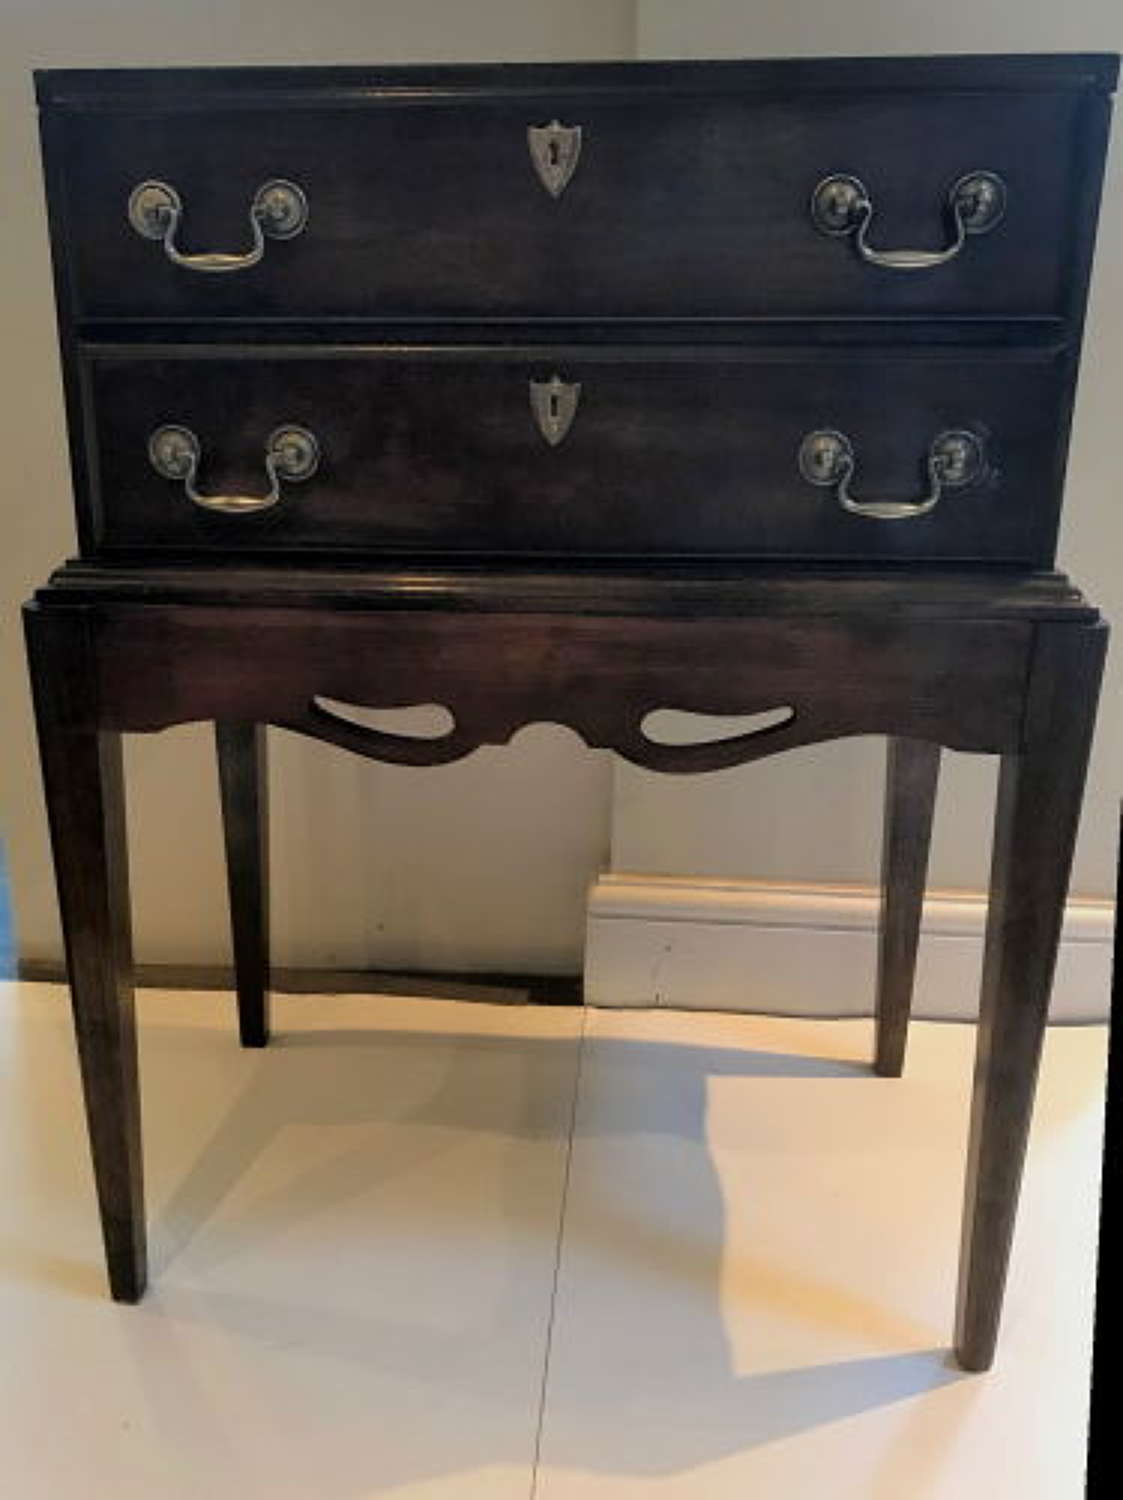 Mahogany Tray Table with Two Drawers Above